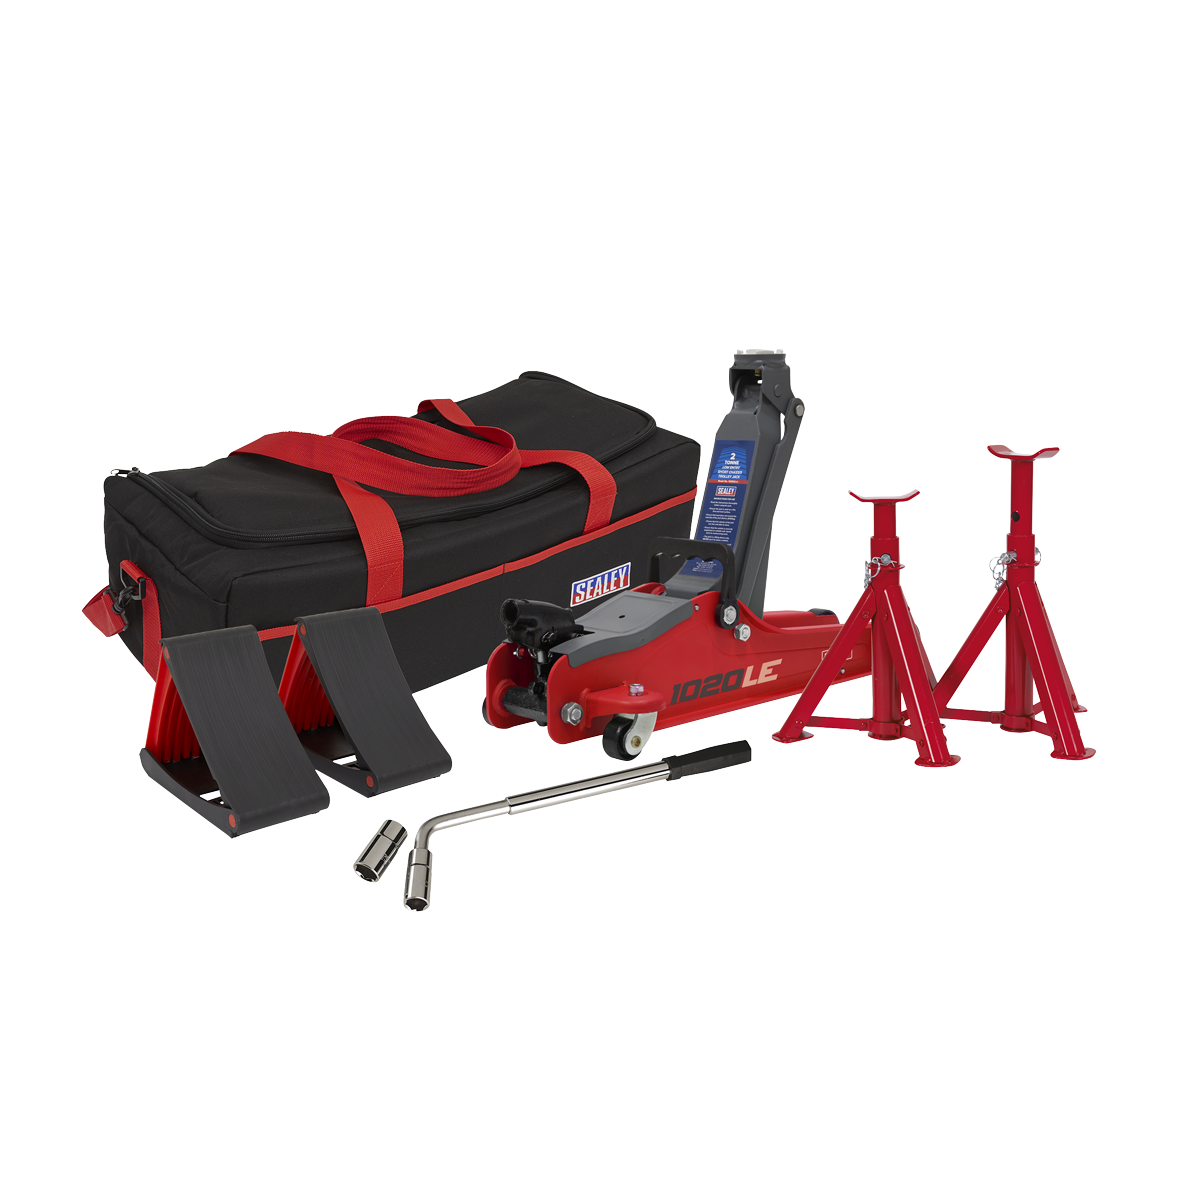 Trolley Jack 2tonne Low Entry Short Chassis & Accessories Bag Combo - Red